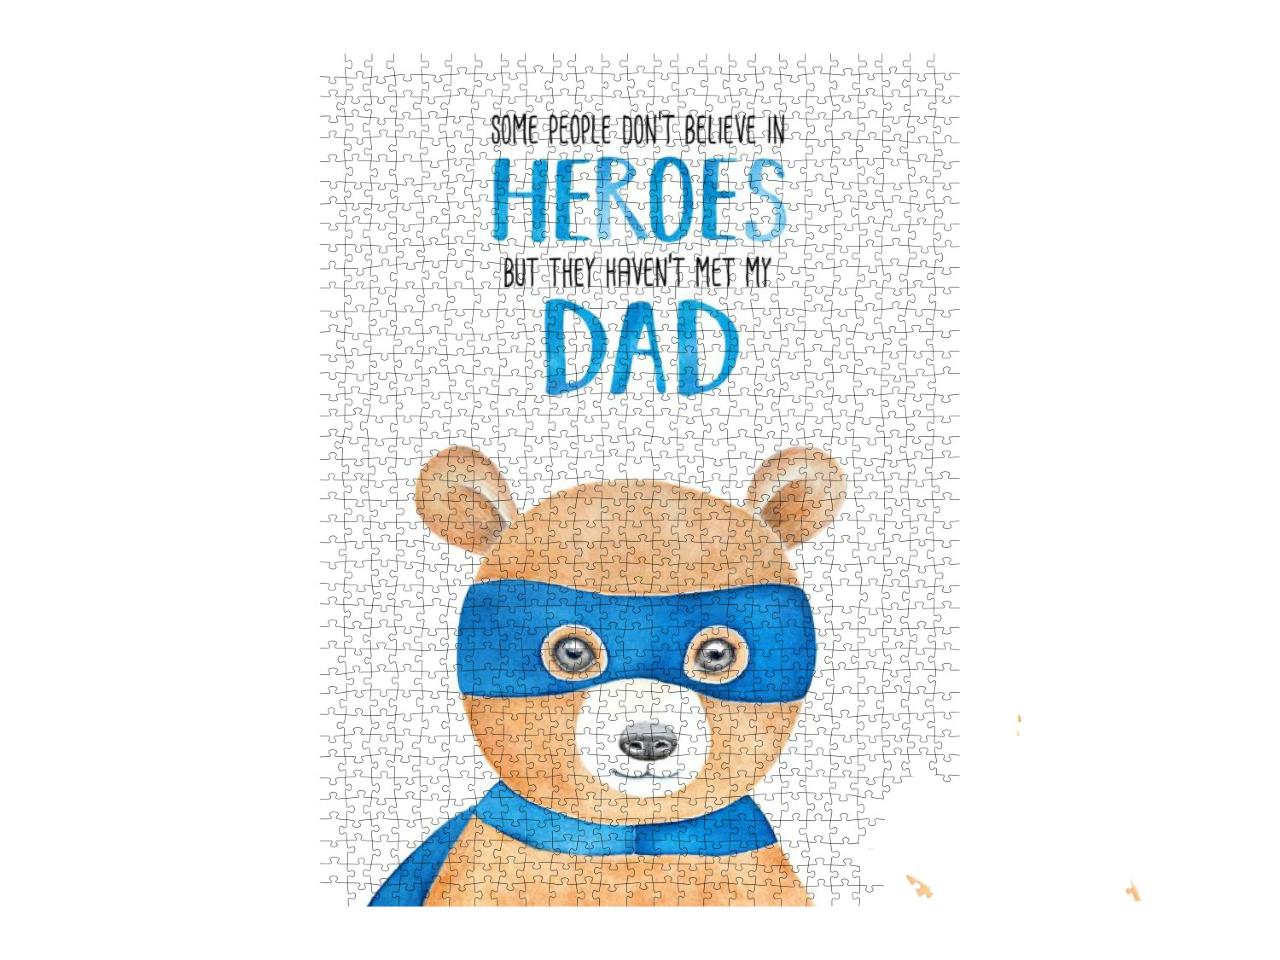 Happy Fathers Day Card Design with Little Teddy B... Jigsaw Puzzle with 1000 pieces